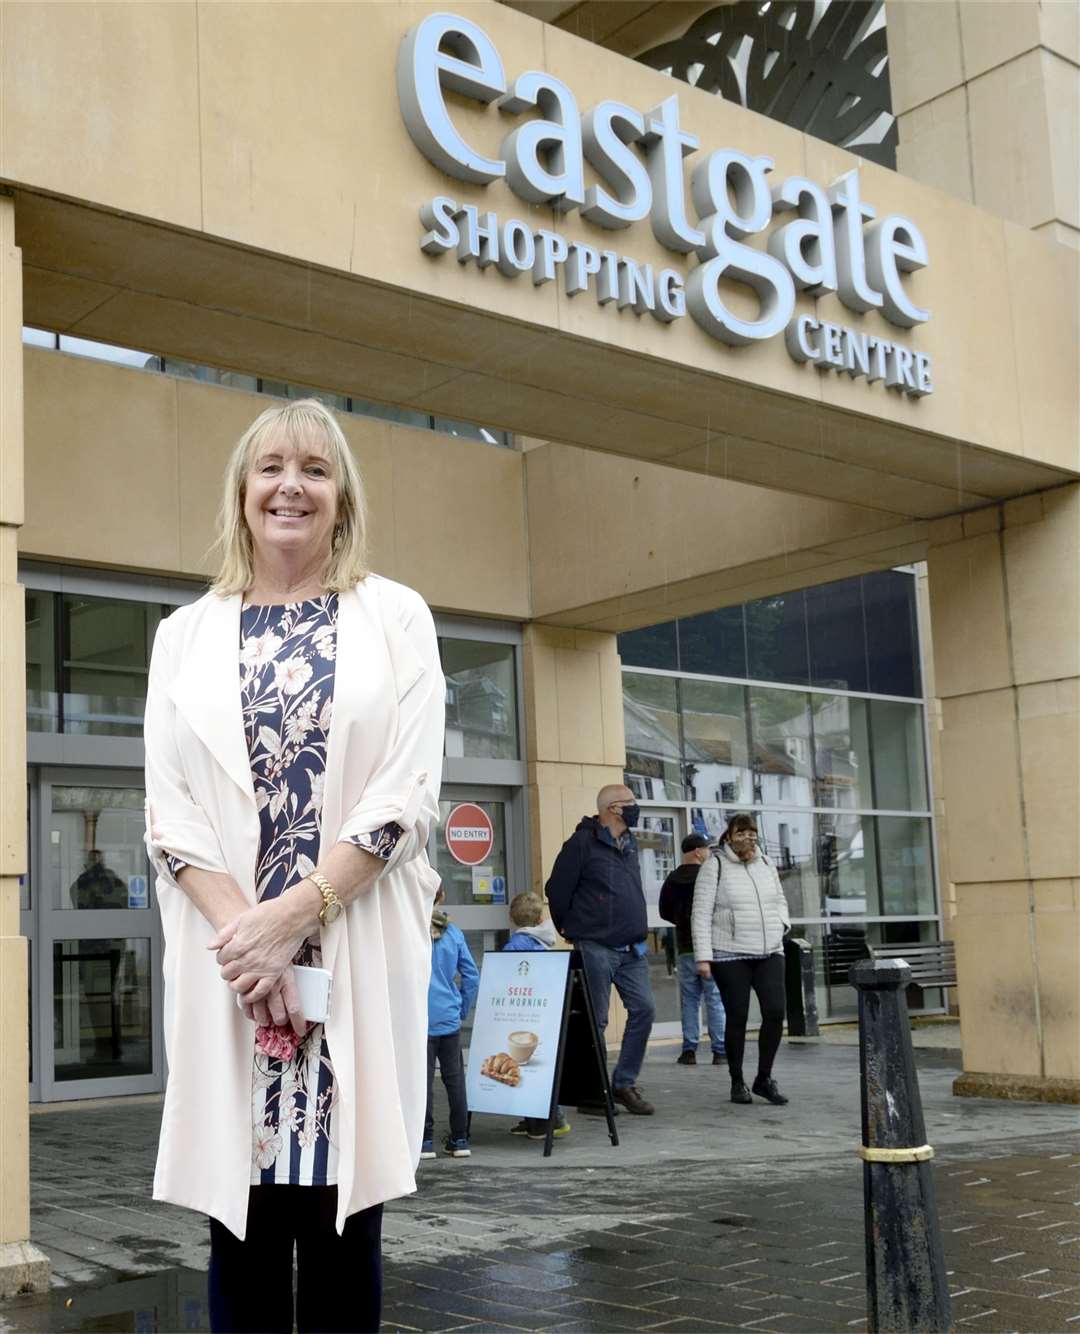 Eastgate Shopping Centre manager Jackie Cuddy.